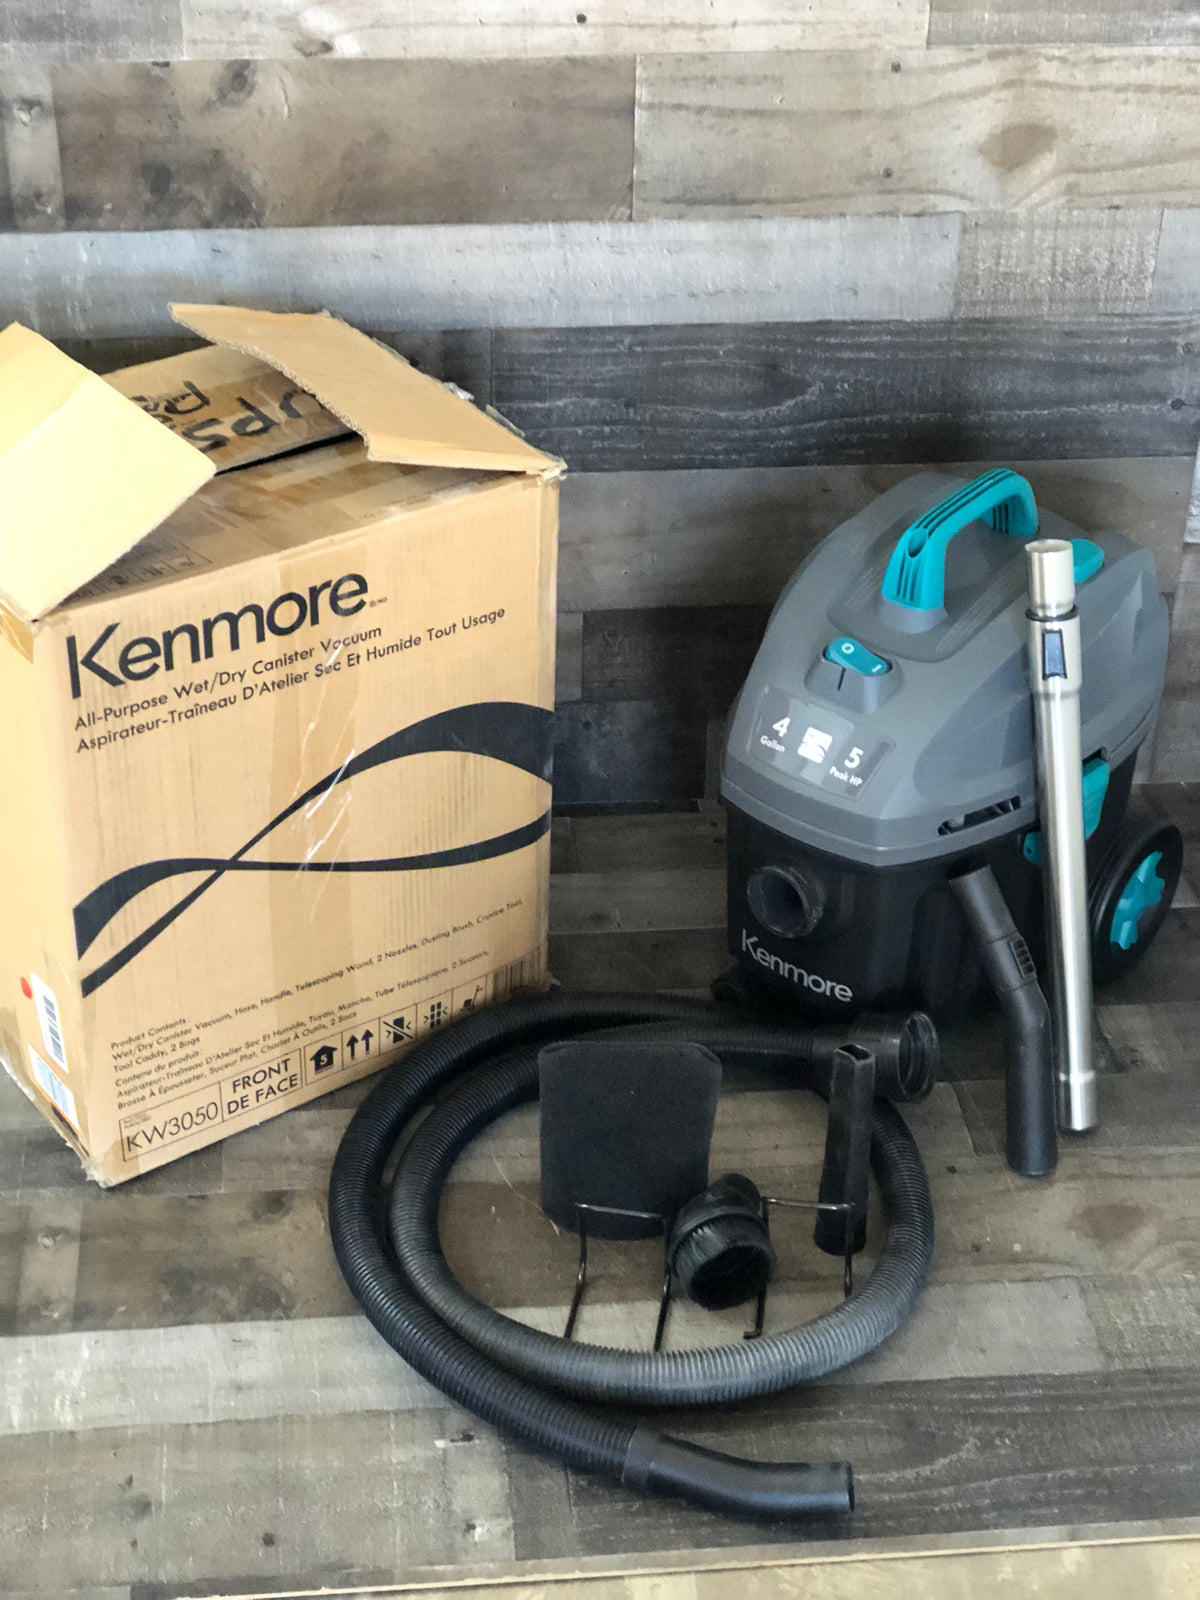 Kenmore KW3050 Wet Dry Canister Vac 4 Gallon 5 Peak HP 2-Stage Motor Shop Vacuum Cleaner with Washable HEPA Filter & Dust Bags for Hard Floor & Carpet, Black